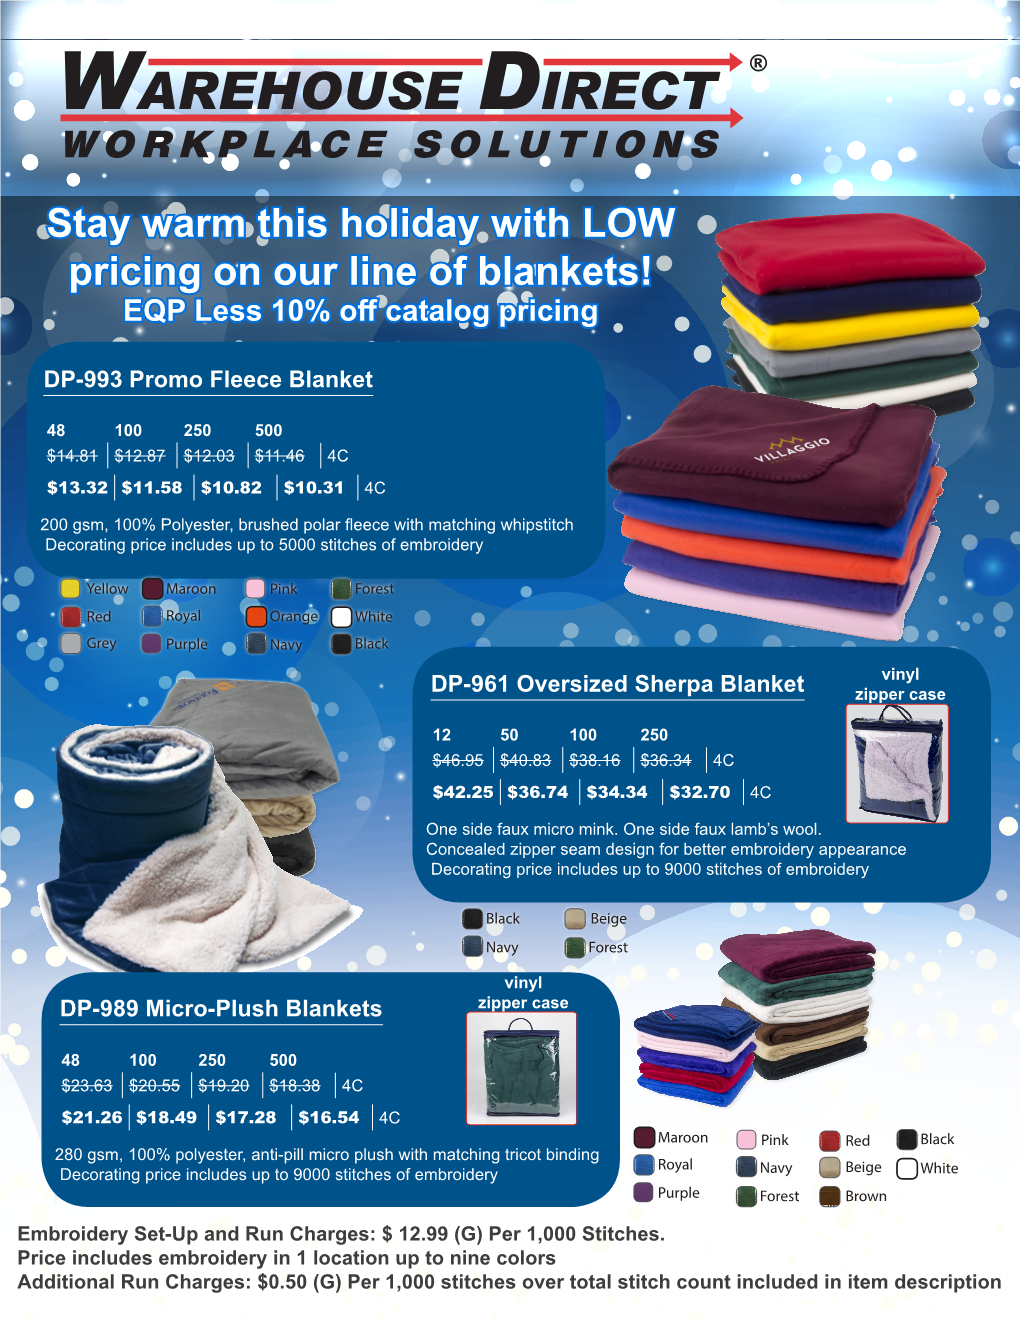 Stay Warm This Holiday with LOW Pricing on Our Line of Blankets! EQP Less 10% Off Catalog Pricing